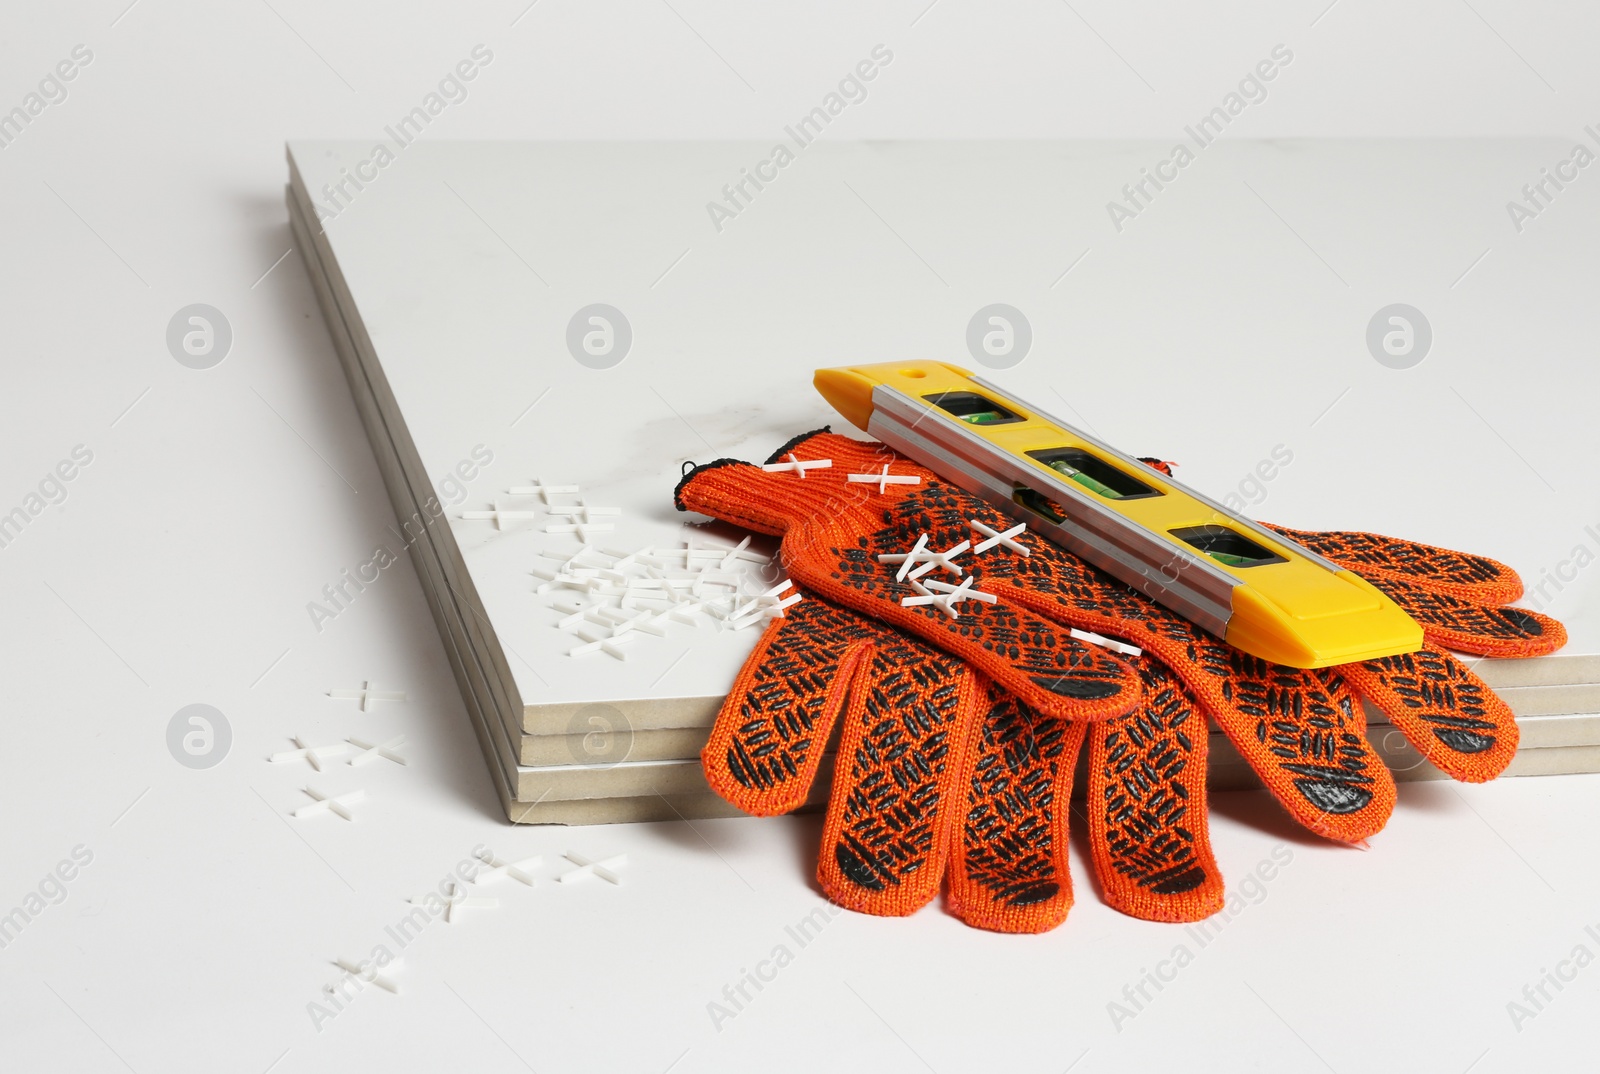 Photo of Ceramic tiles with gloves and level on white background